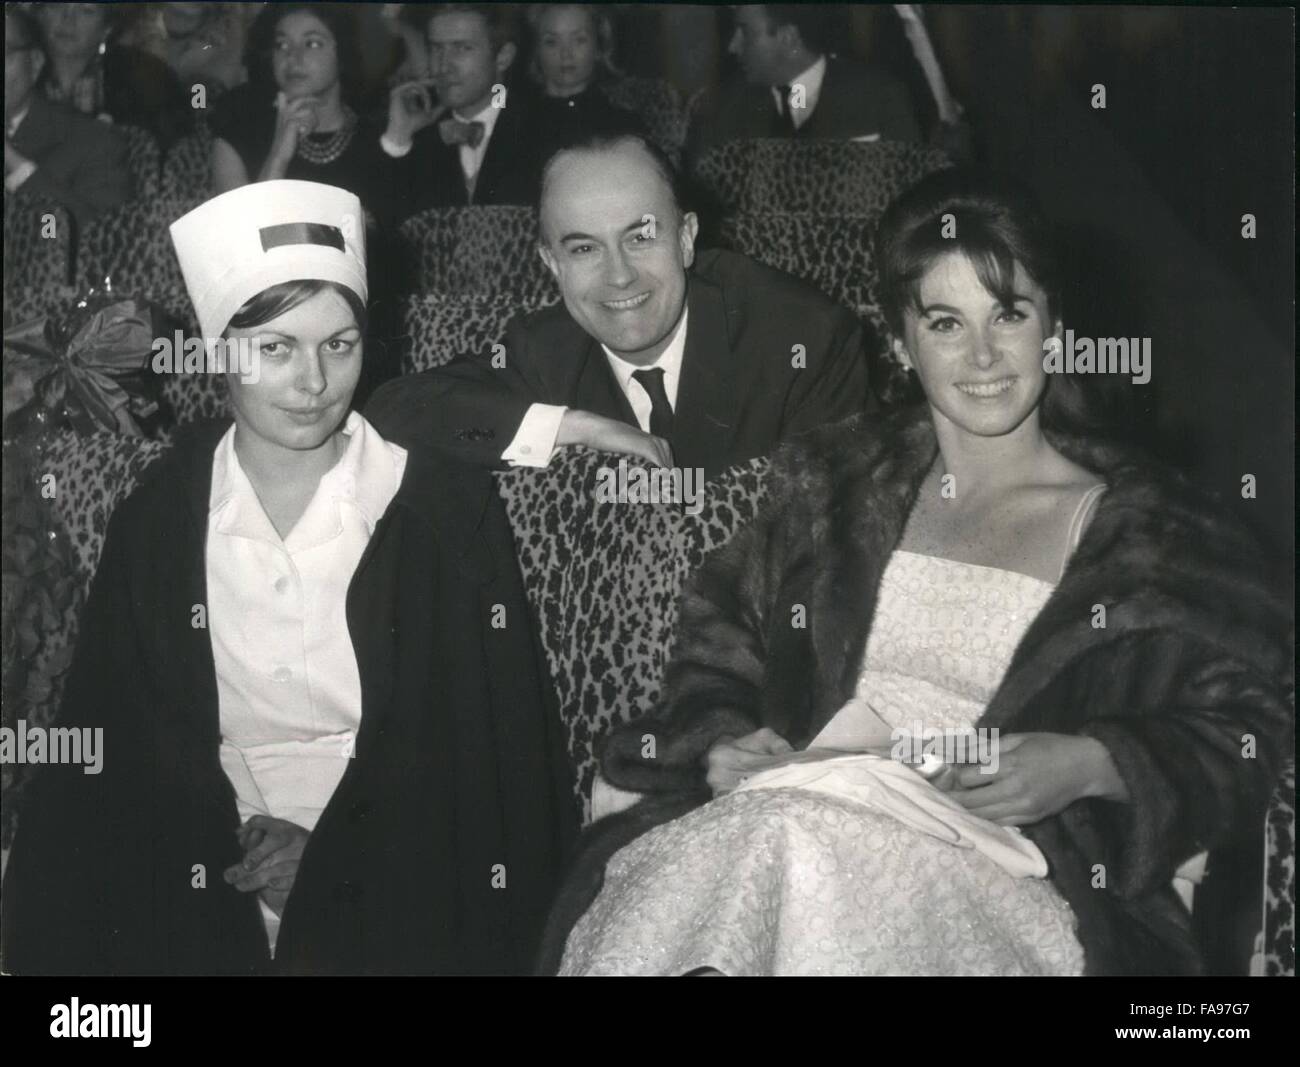 1968 - Heroine of ''The Internes'' in Paris; Young actress Stefanie Powers assisted yesterday evening at first night presentation of film ''The Internes'' in which she is sharing stardom with Suzy Parker. Presentation in Cinema ''Le Paris'' went for the benefit of Association of Widows and Orphans of Doctors, presided by Mrs. Godard D' Allaines. Photo Shows Well Known Doctor Soubiran with pretty Stefanie Powers and also a Authentic Nurse. © Keystone Pictures USA/ZUMAPRESS.com/Alamy Live News Stock Photo